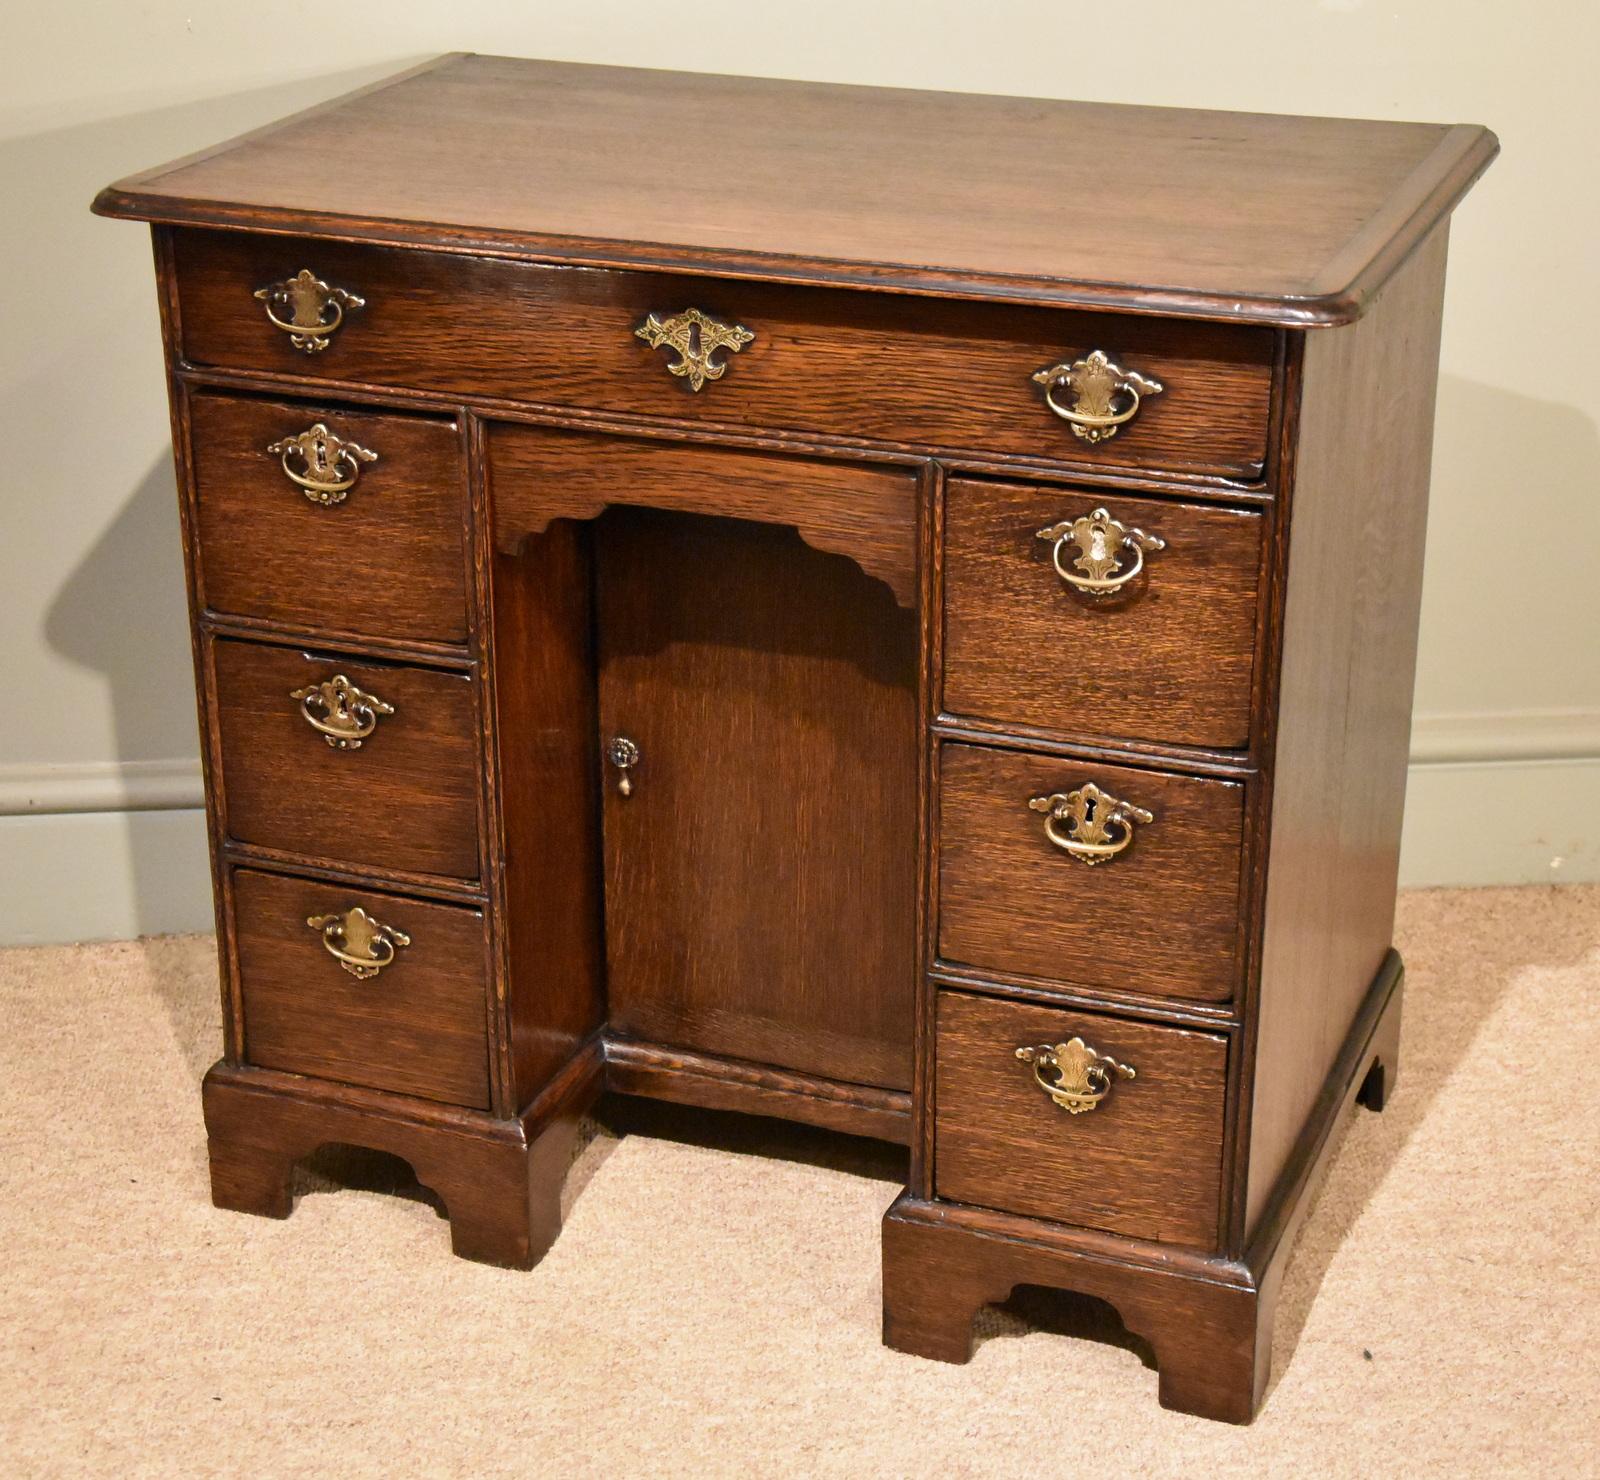 An unusually small George I oak kneehole desk of one large and six small drawers

Dimensions
Height 27